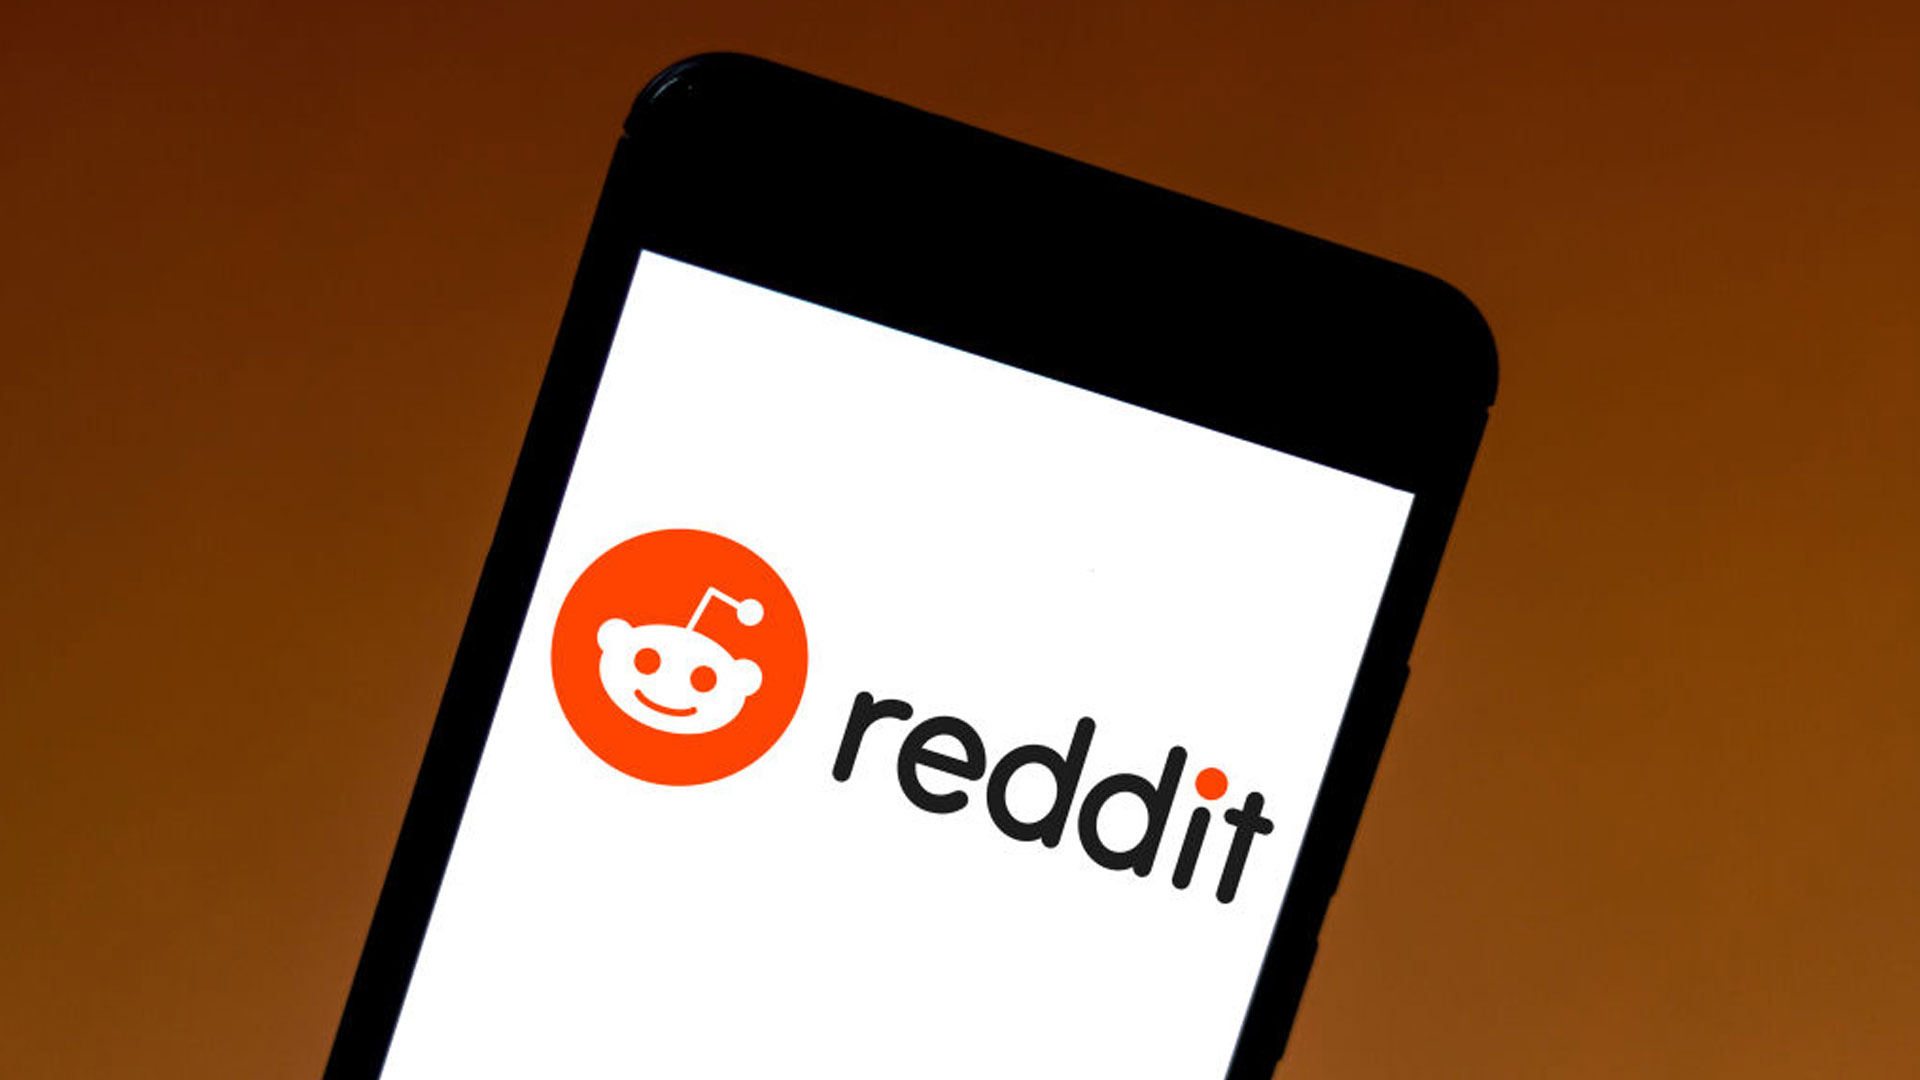 Reddit Servers Down: Social Media Platform Not Loading – Thousands of Users Reporting Issues